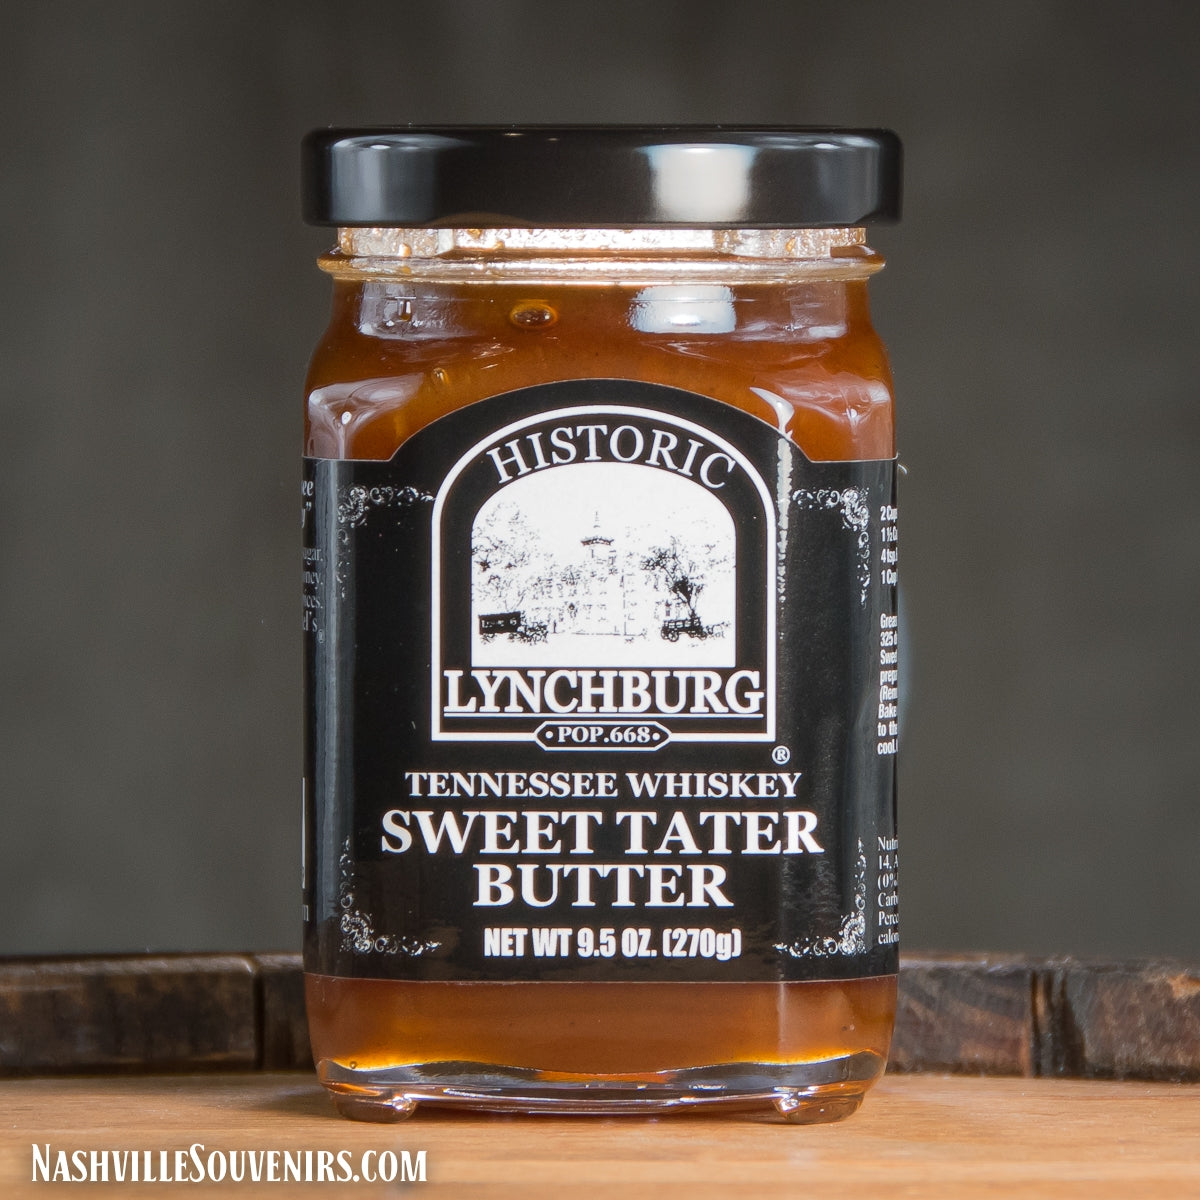 Historic Lynchburg Sweet Tater Butter adds a great touch of Tennessee Whiskey for that special "secret sauce" that tastes so yummy! FREE SHIPPING on all US orders over $75!